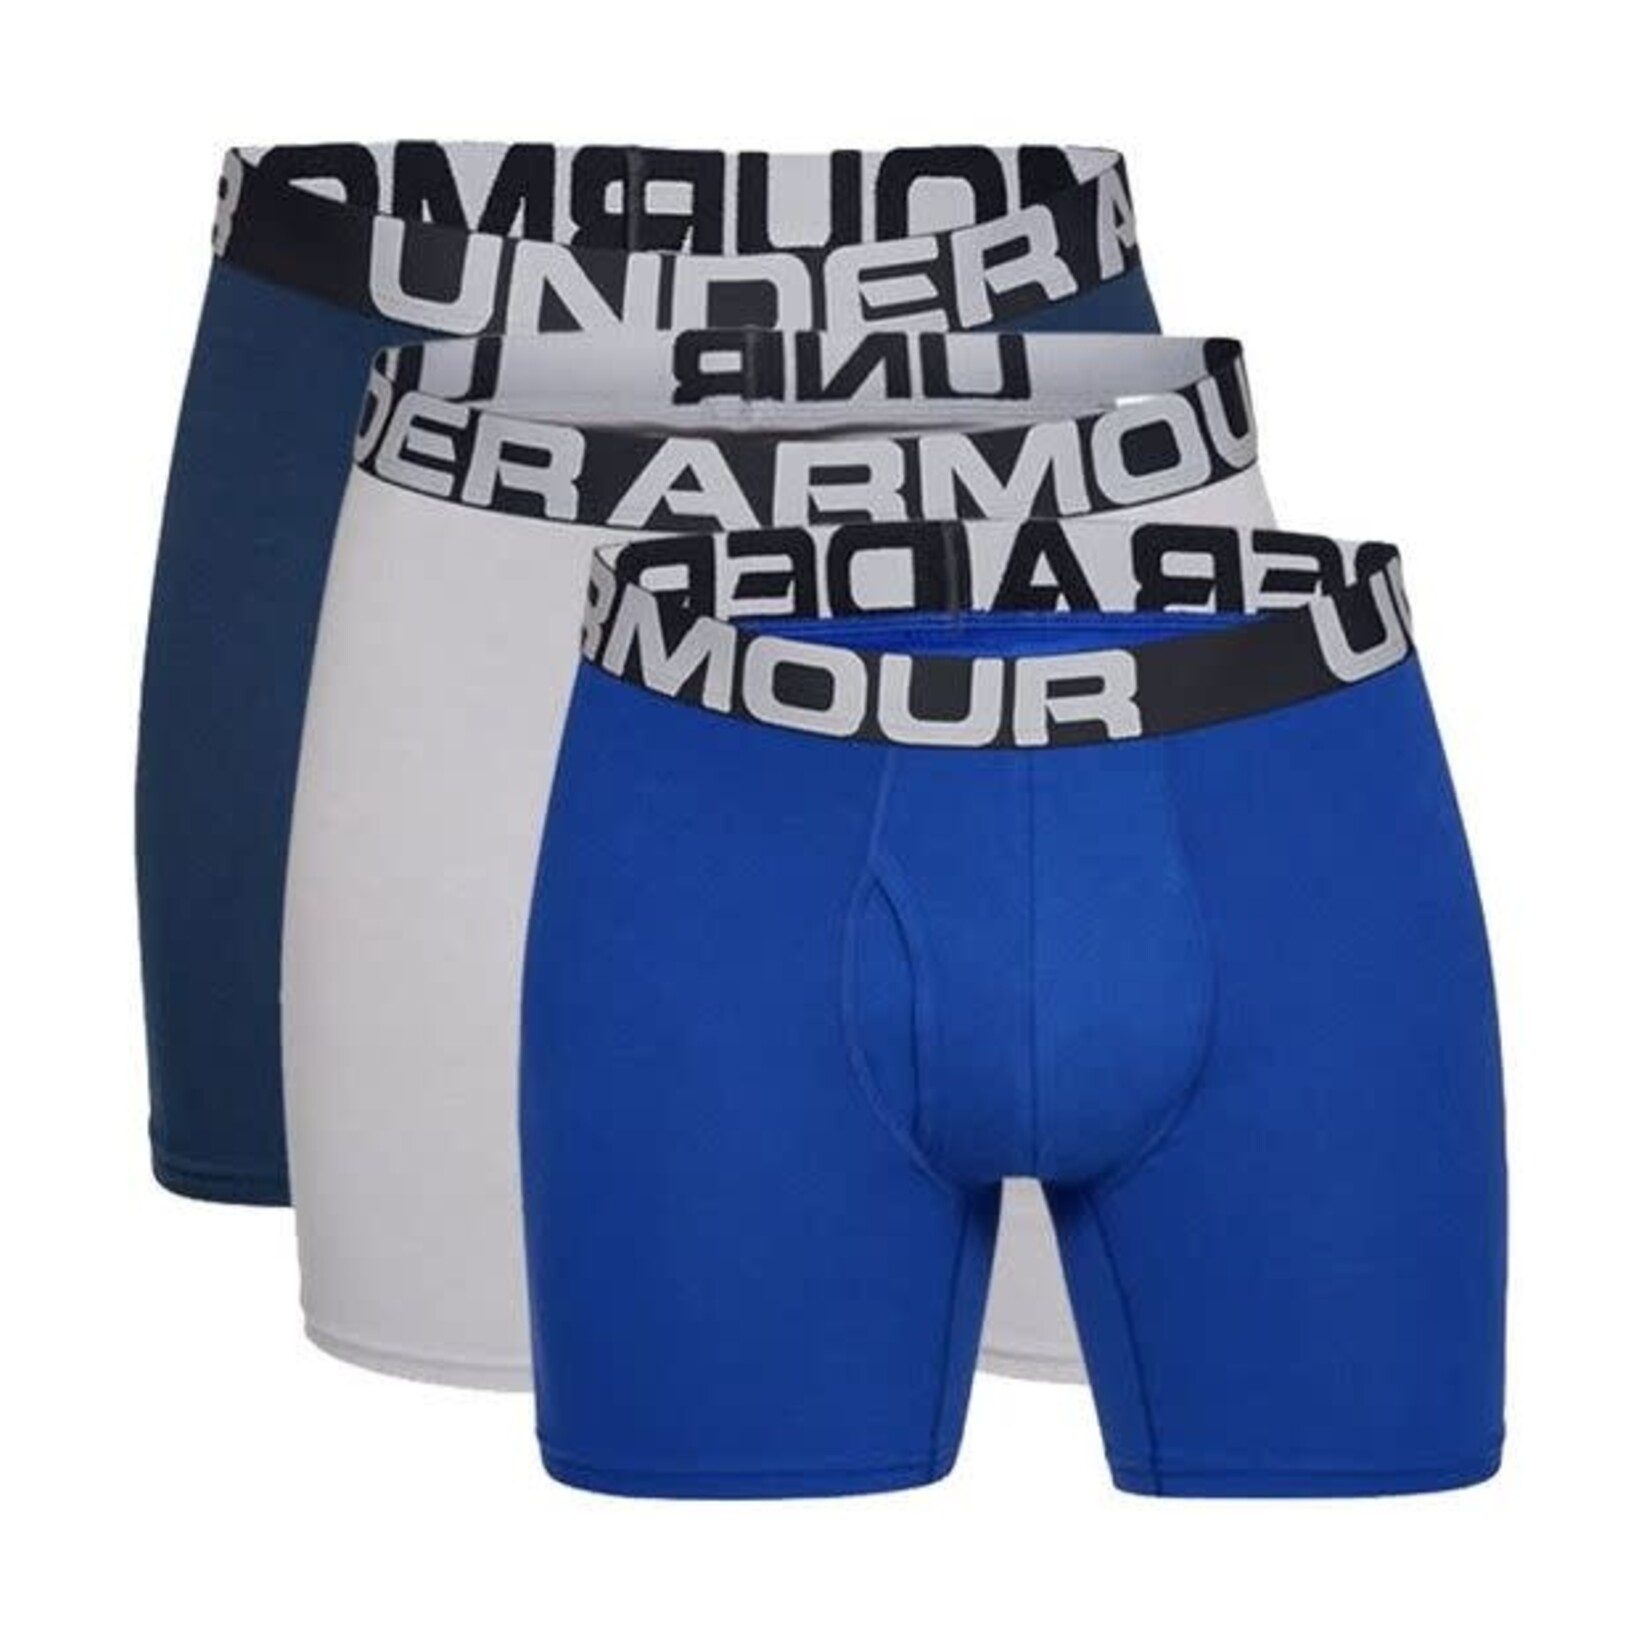 Under Armour Under Armour Underwear, Charged Cotton 6", 3-Pack, Mens